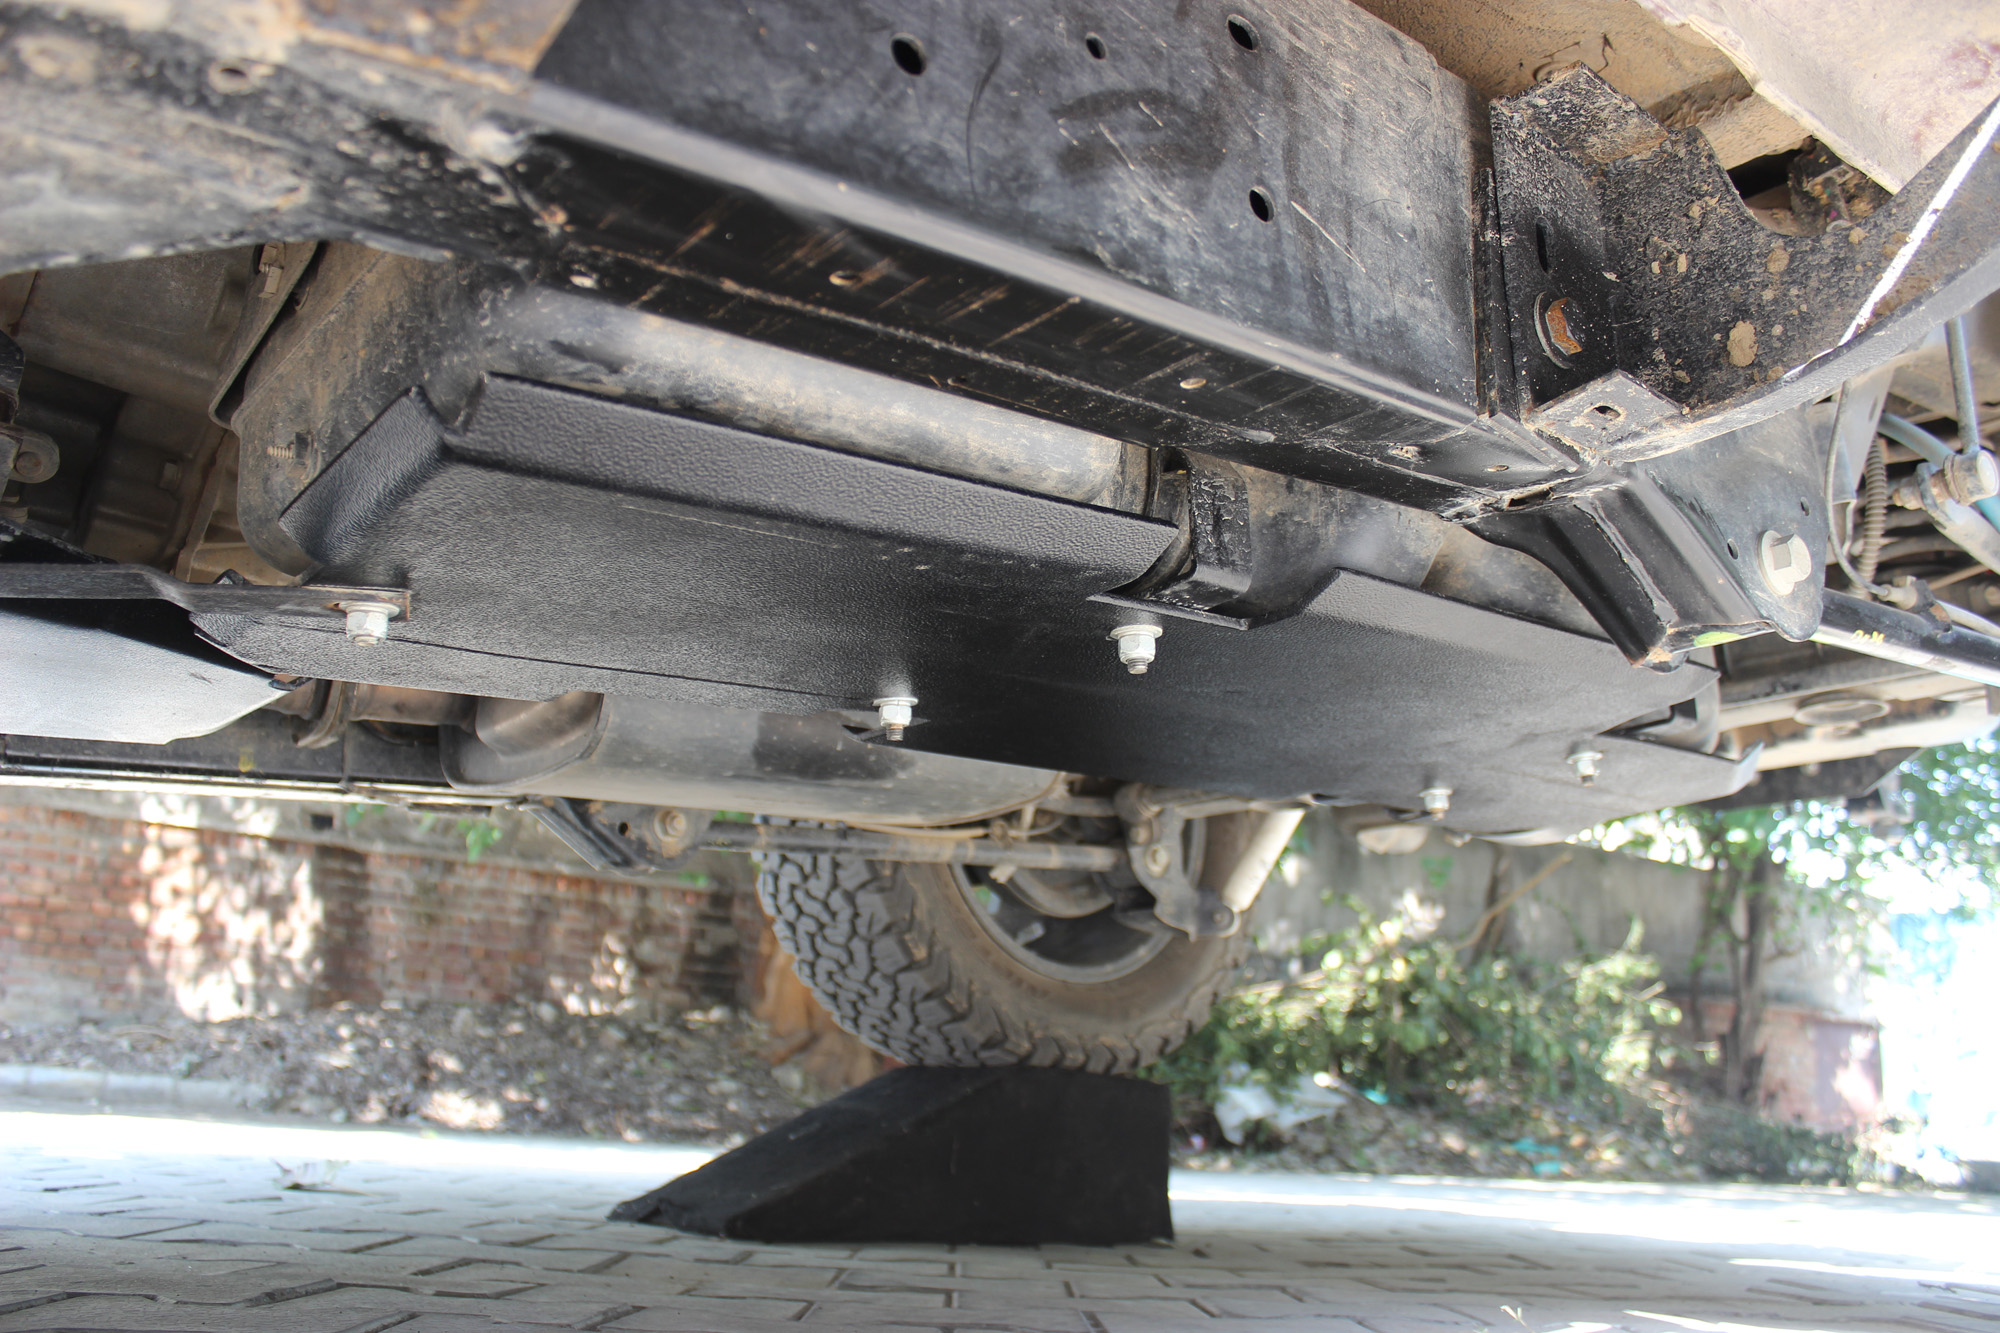 Underbody Protection